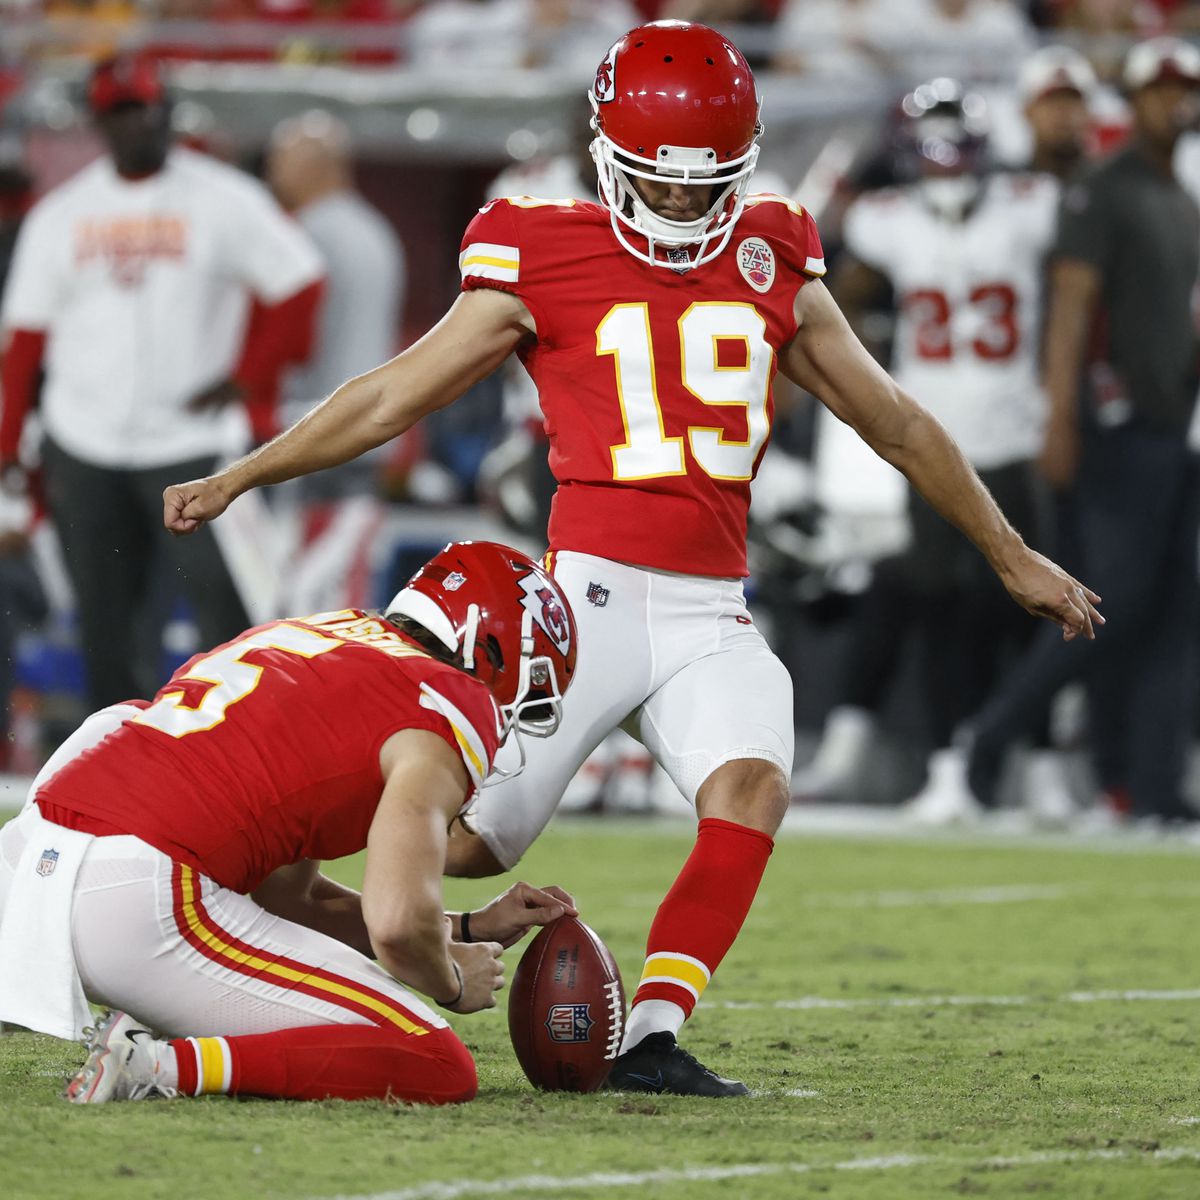 Chiefs Game Today: Chiefs vs Vikings injury report, schedule, live Stream,  TV channel and betting preview for Preseason Week 3 NFL game